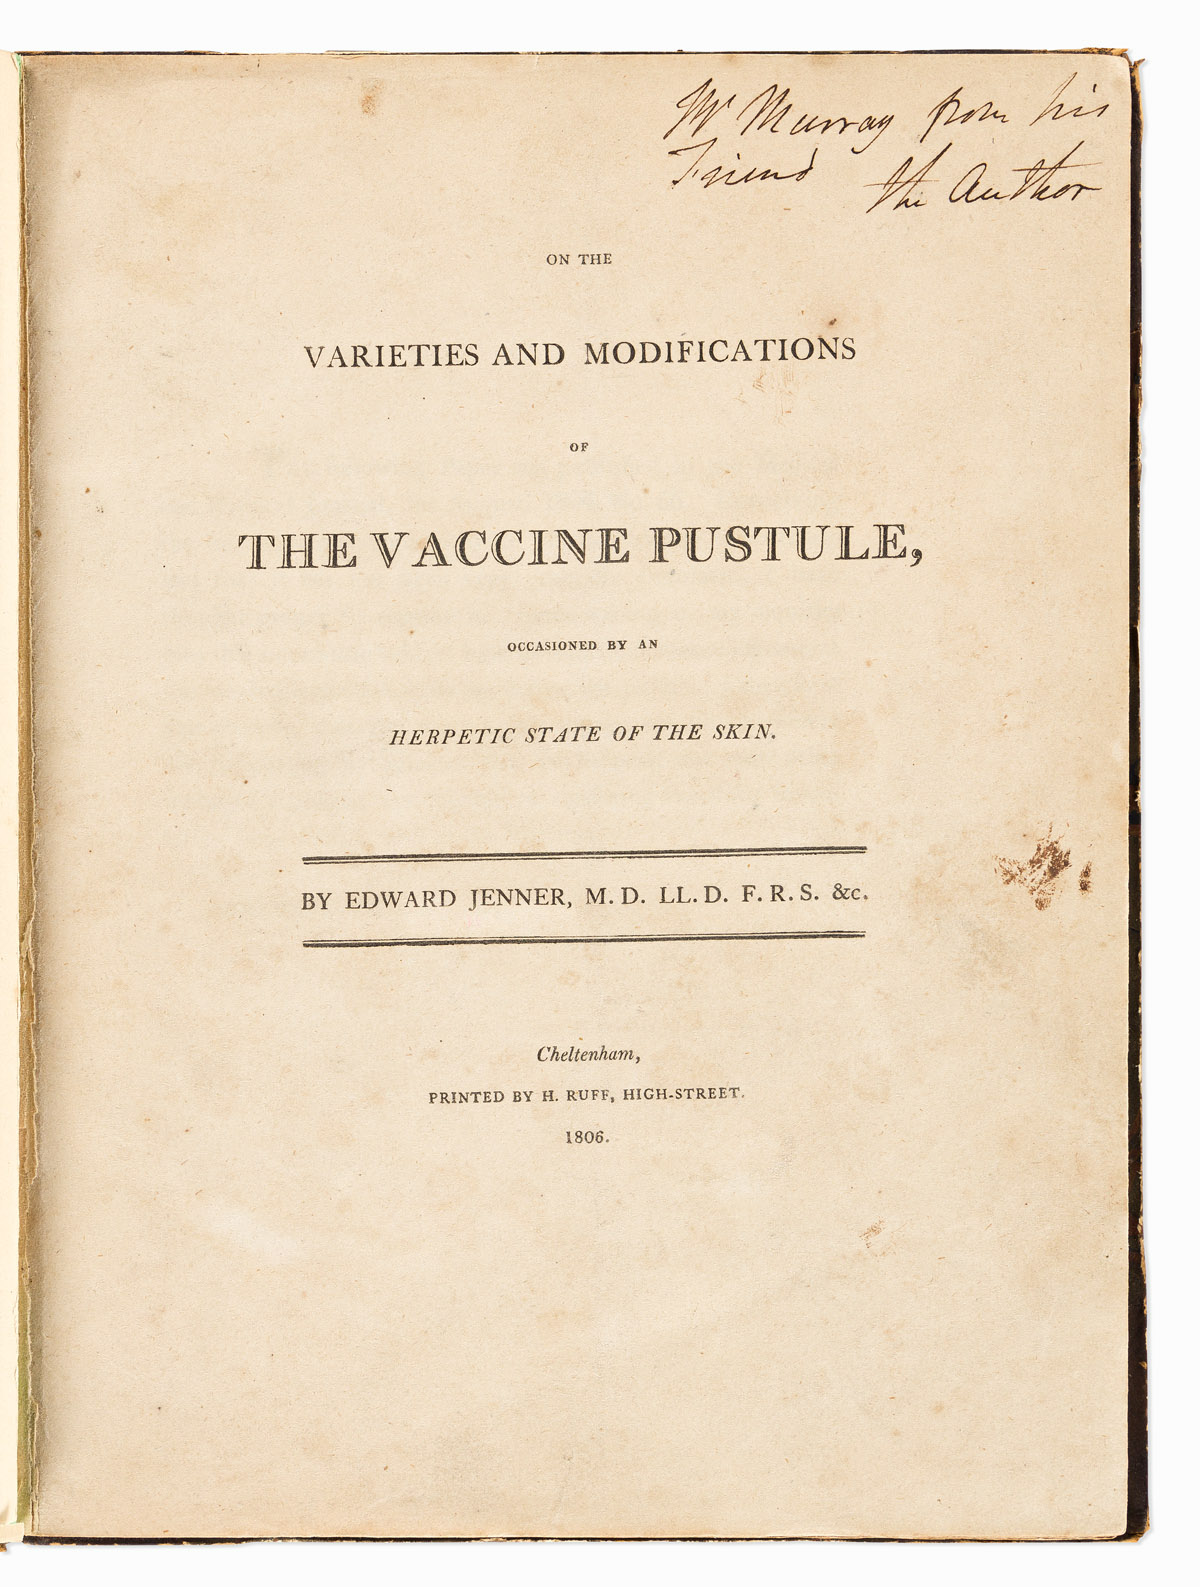 Jenner, Edward (1749-1823) On the Varieties and Modifications of the Vaccine Pustule, Occasioned by an Herpetic State of the Skin, Auth